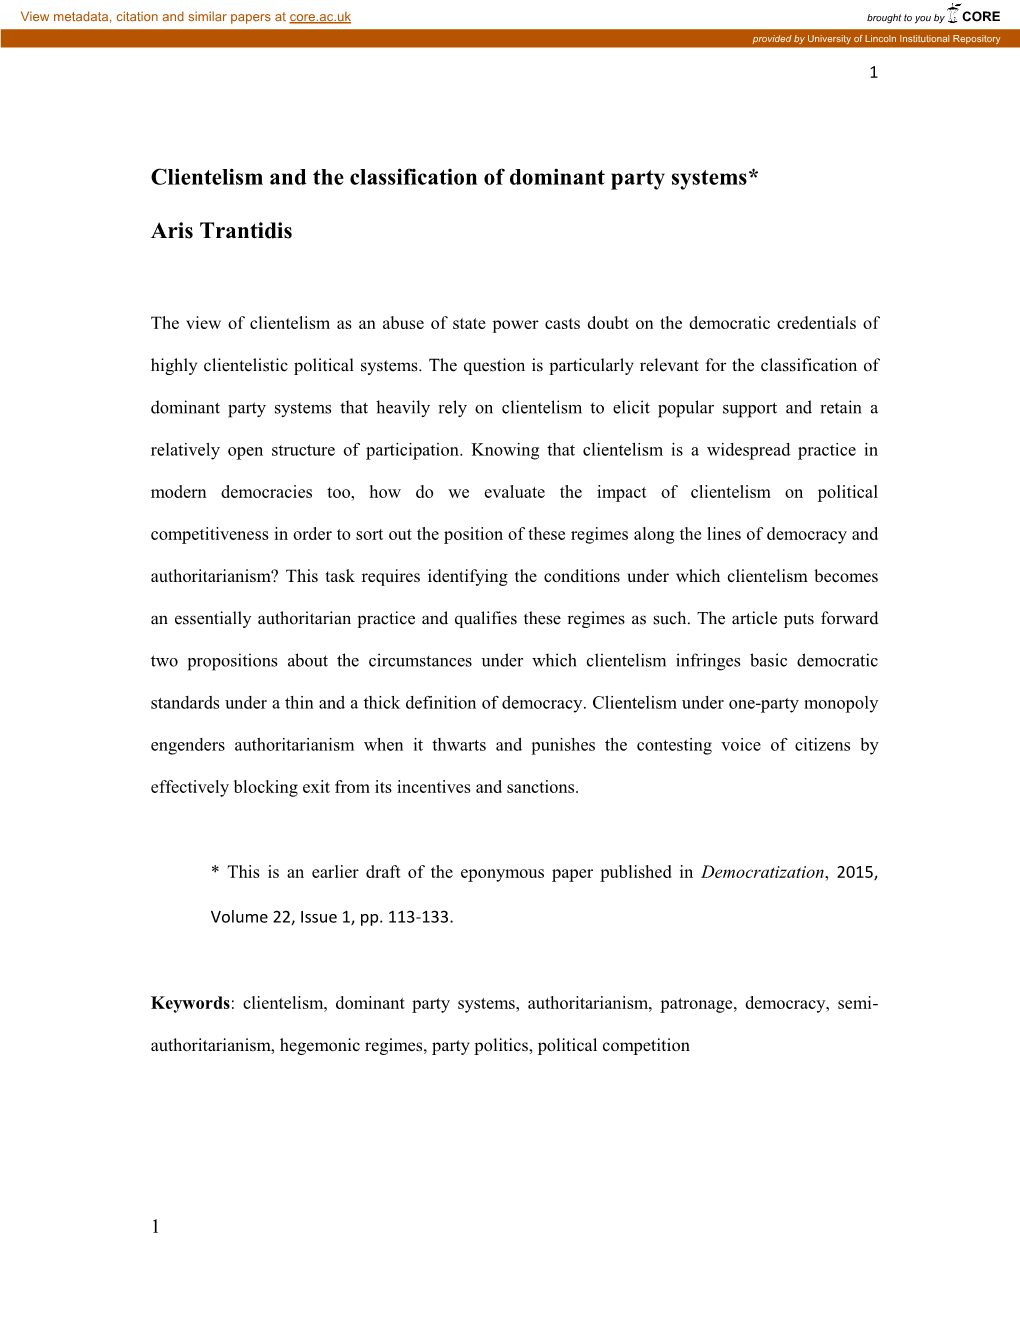 Clientelism and the Classification of Dominant Party Systems*